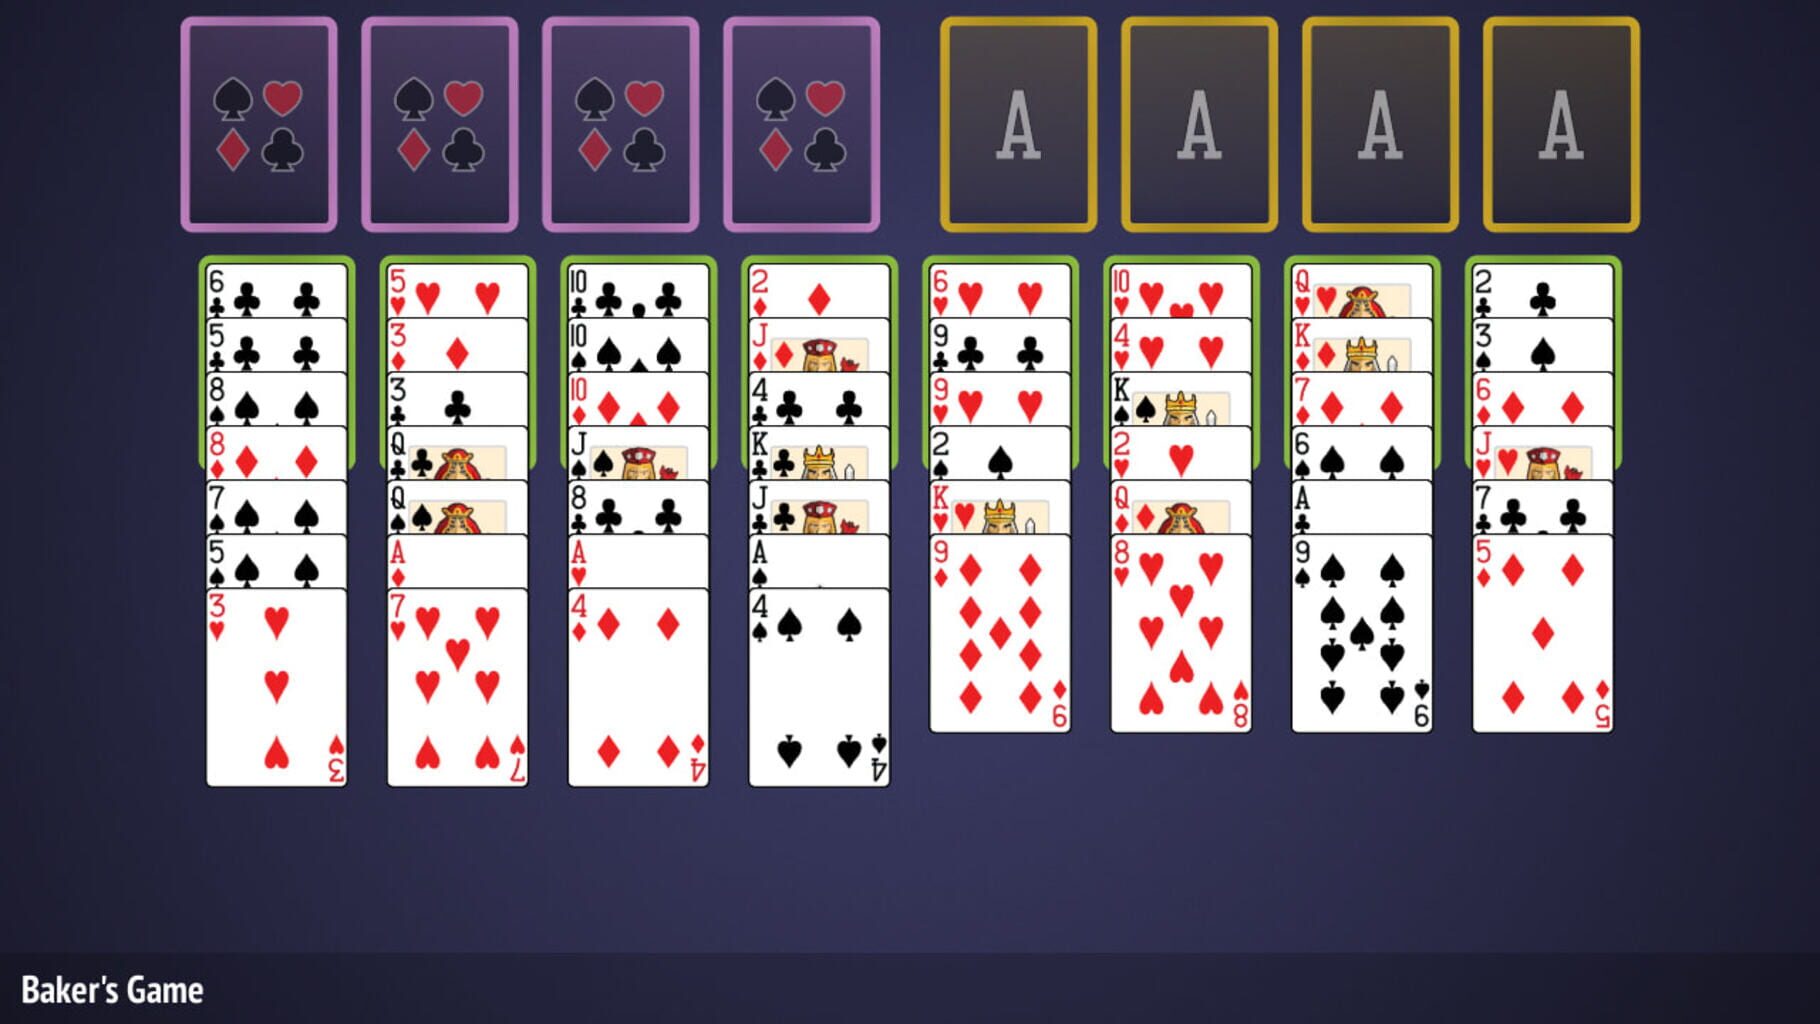 FreeCell Solitaire Collection screenshot